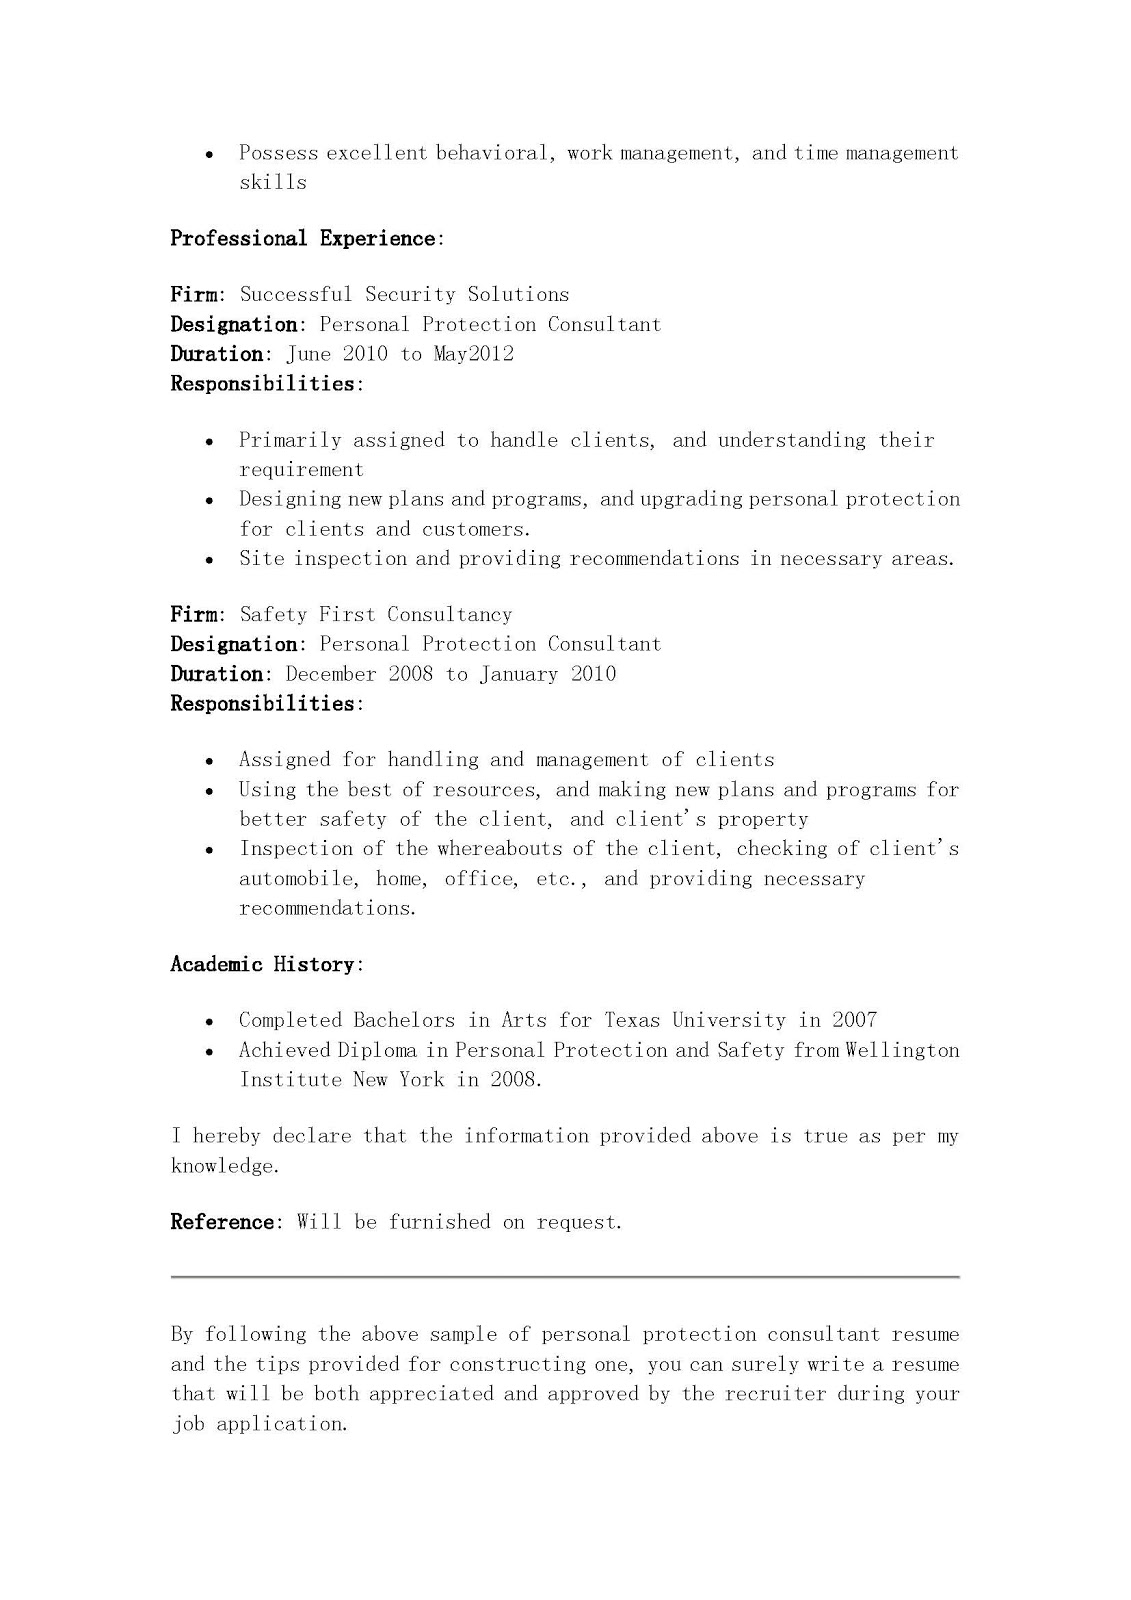 Clinical data manager resume template